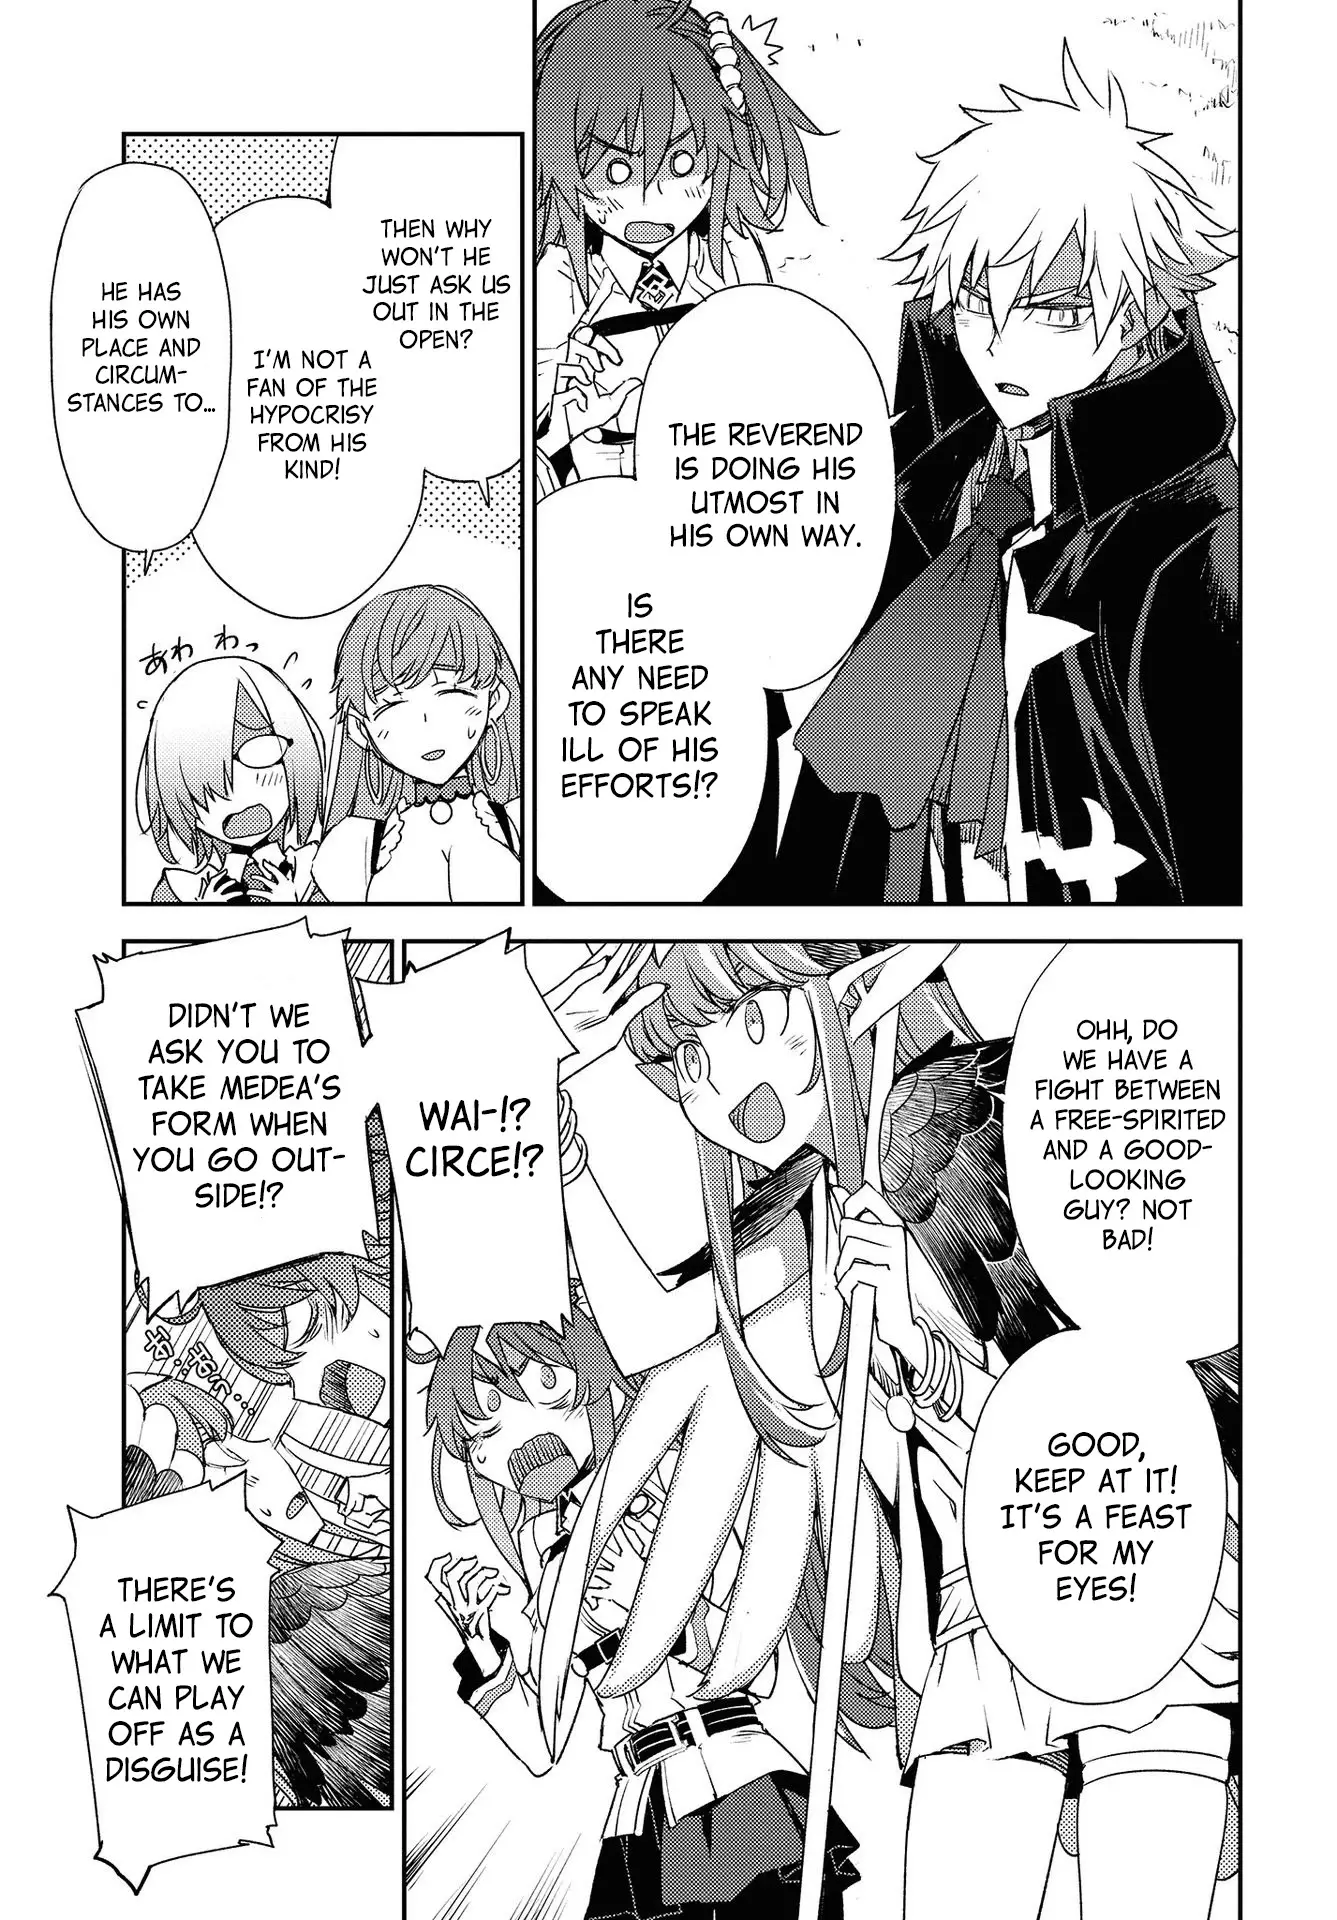 Fate/grand Order: Epic Of Remnant - Subspecies Singularity Iv: Taboo Advent Salem: Salem Of Heresy - 20 page 11-20501641